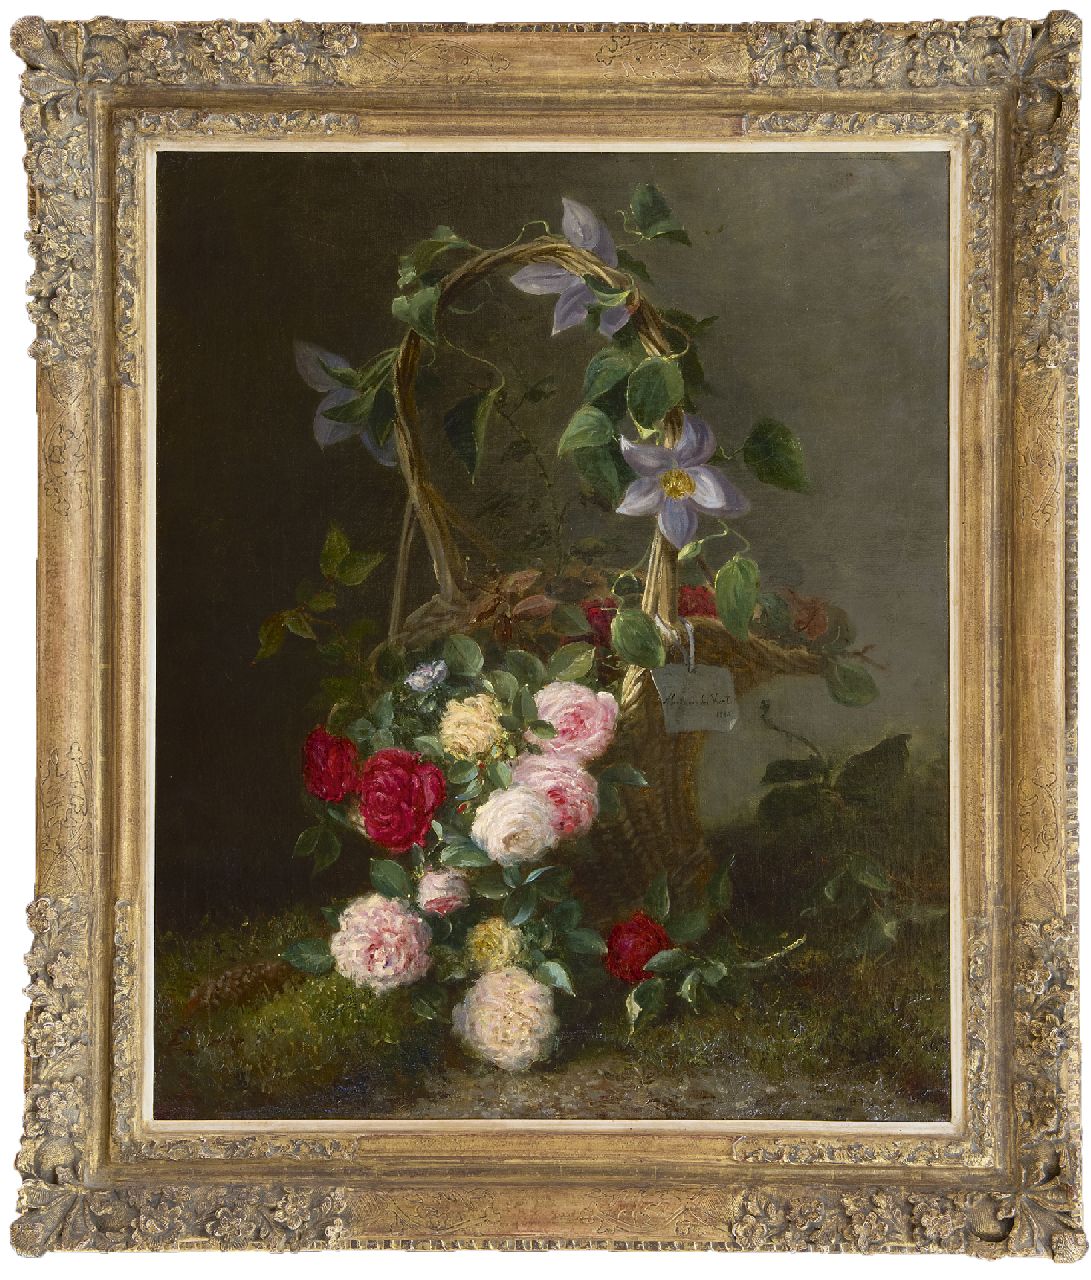 Voort in de Betouw-Nourney M. van der | Maria van der Voort in de Betouw-Nourney | Paintings offered for sale | Roses in an ornamental basket, oil on canvas 79.5 x 66.5 cm, signed c.r. on a painted label and dated 1885